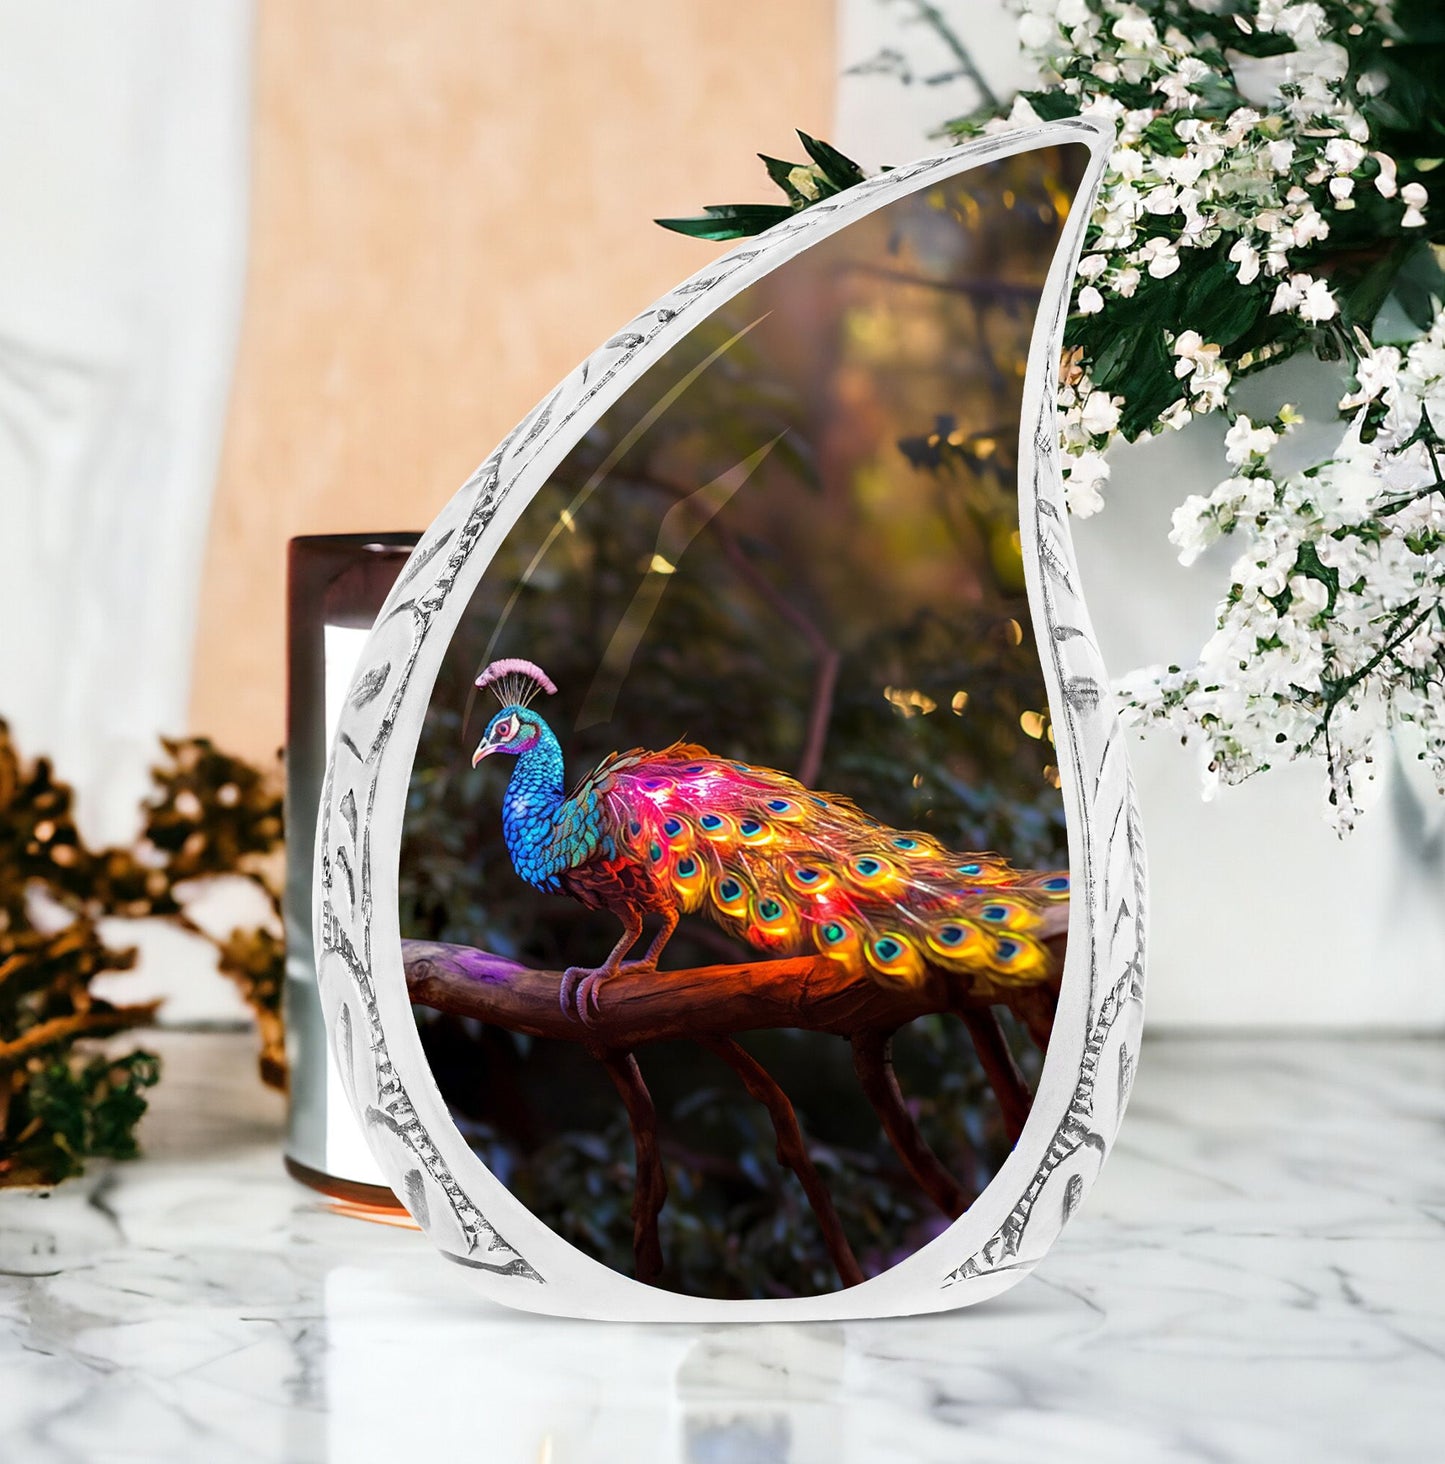 Large Peacock-themed urn for human ashes with a glowing tail, ideal for adult man's burial or cremation